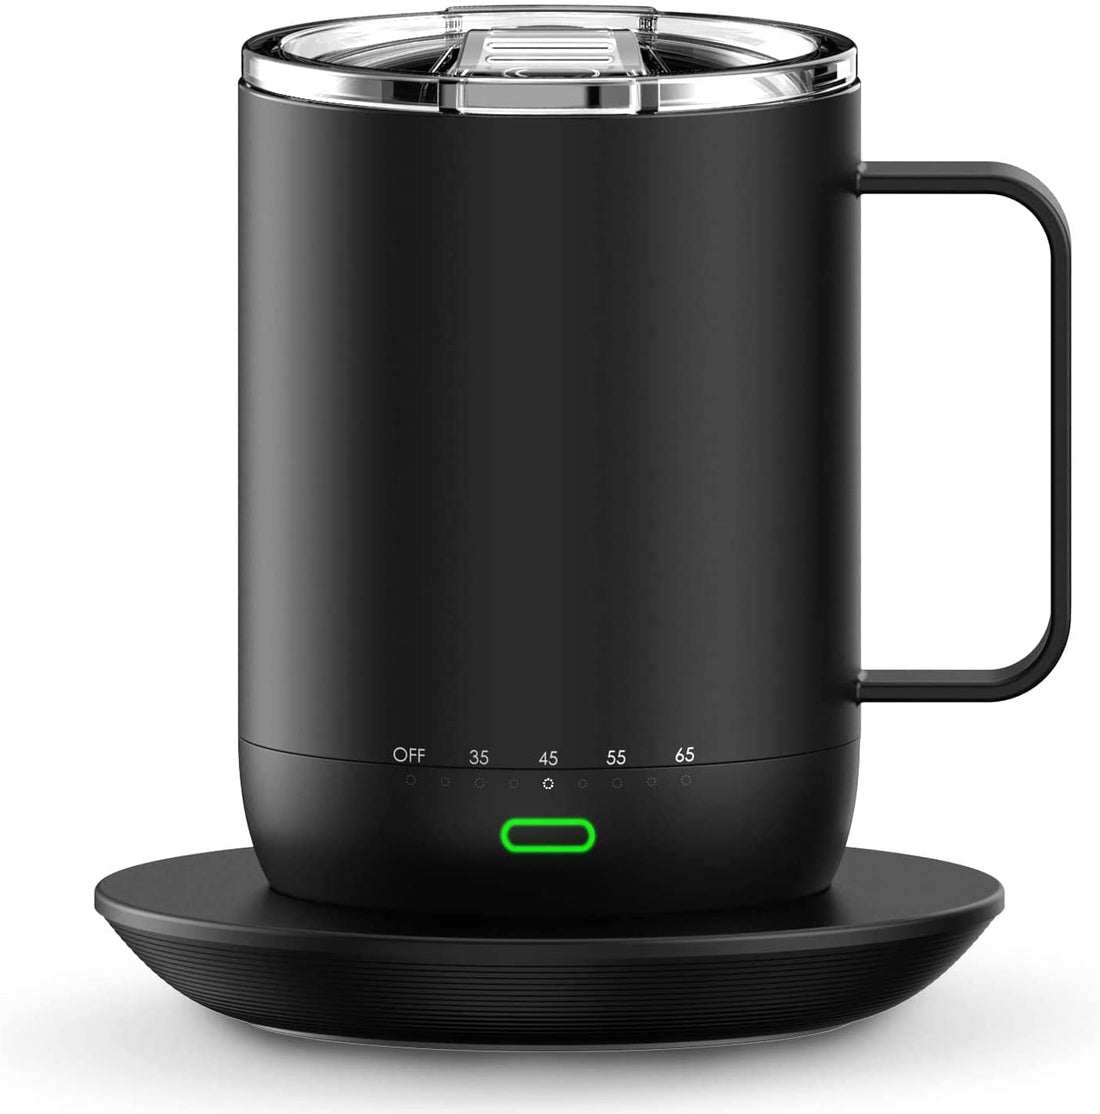 USB Rechargeable Stainless Steel Self-Stirring Mug with Magnetic Stirr –  USA Gadget Store